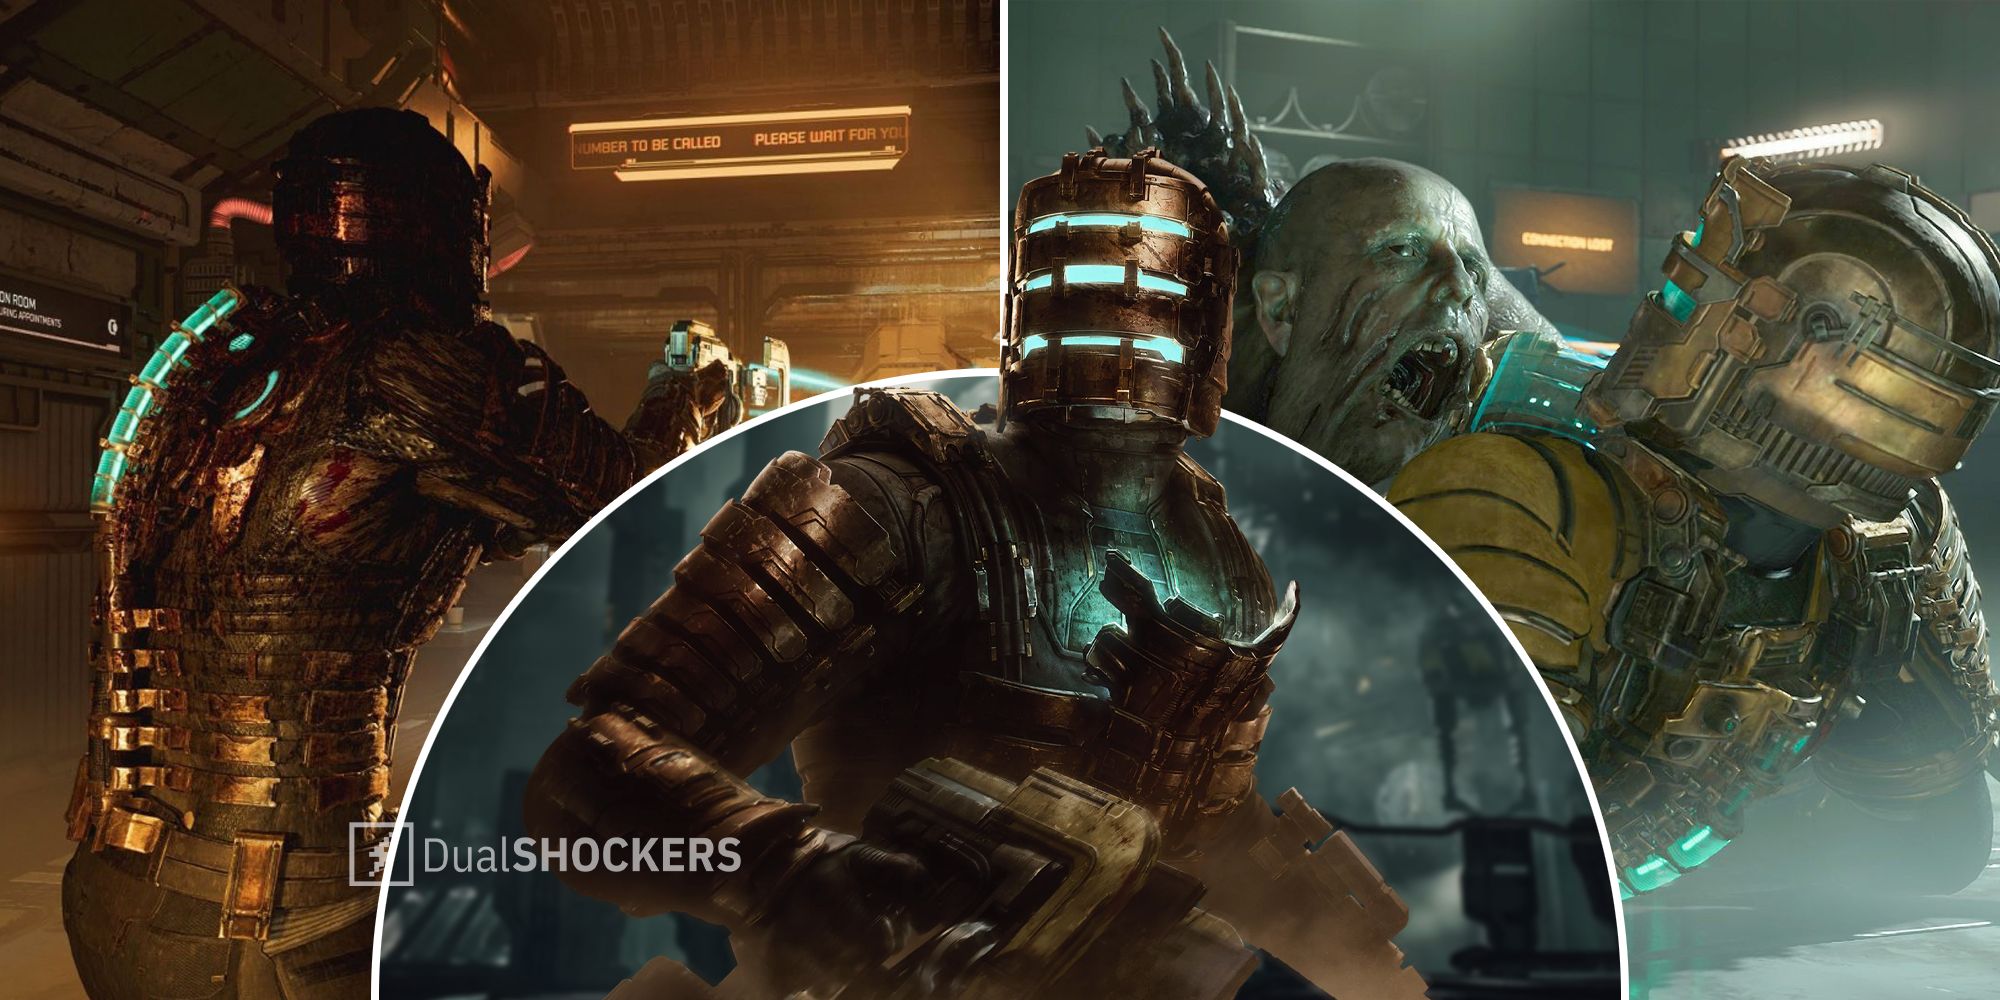 Dead Space Remake Level 6 Suit Upgrade Guide: How to Unlock